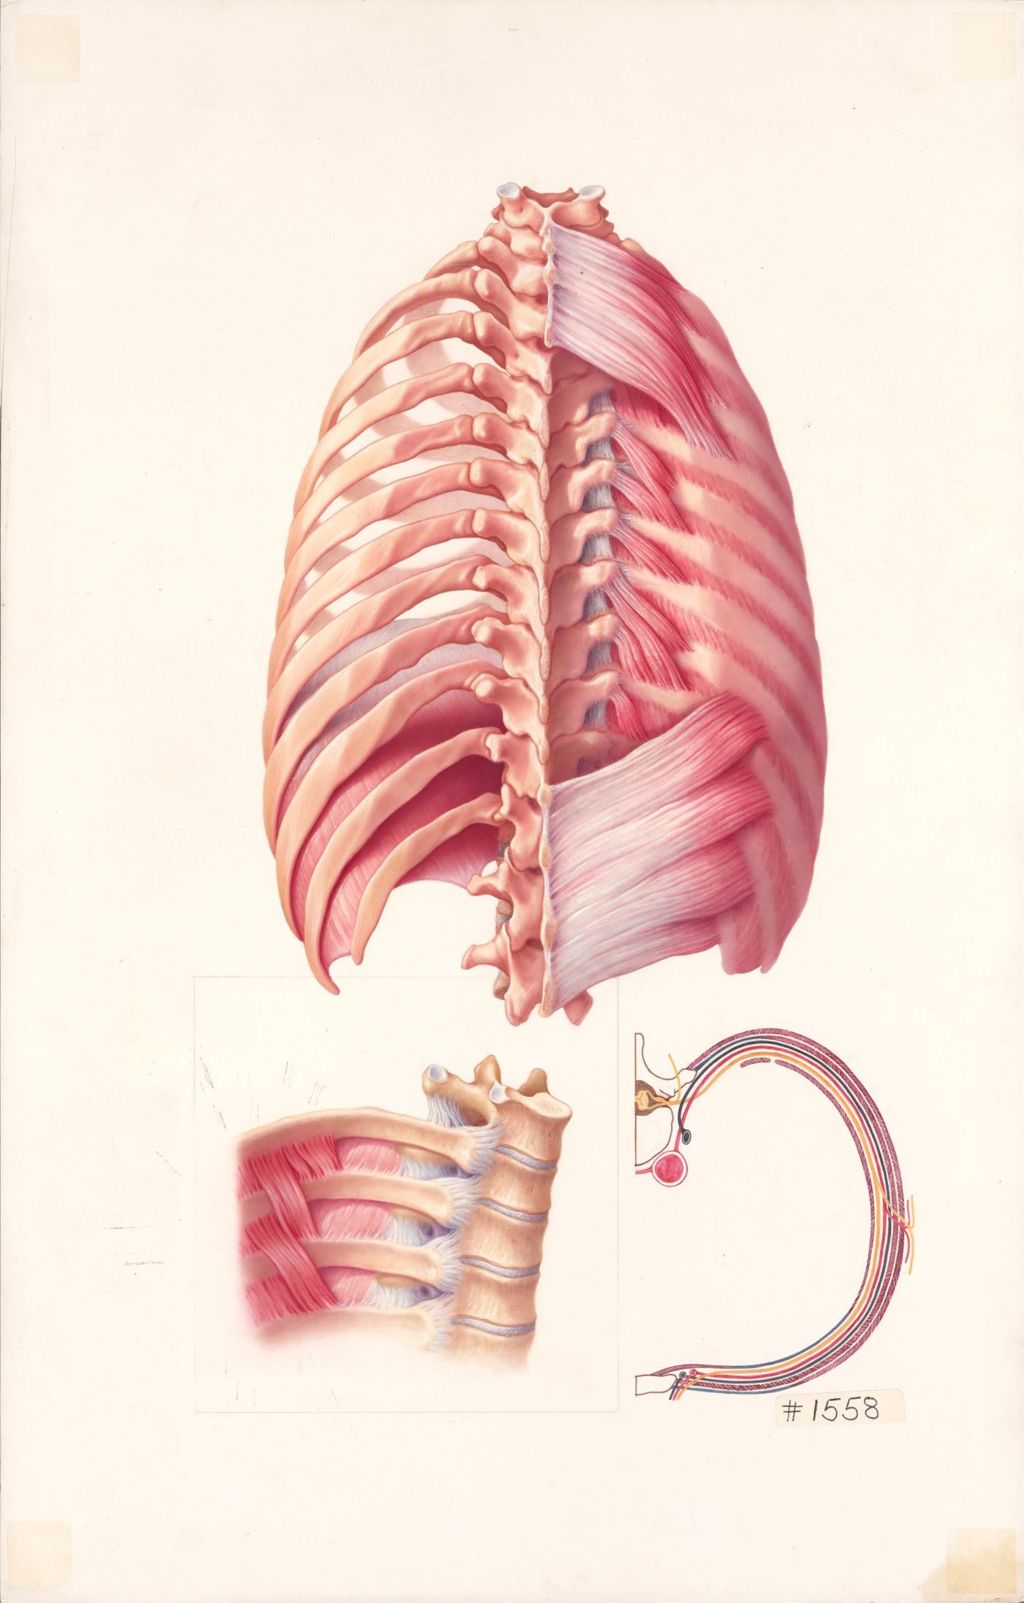 Medical Profiles, Plate II, The Anatomical Disposition of the Thorax, The Thoracic Wall Posterior Aspect